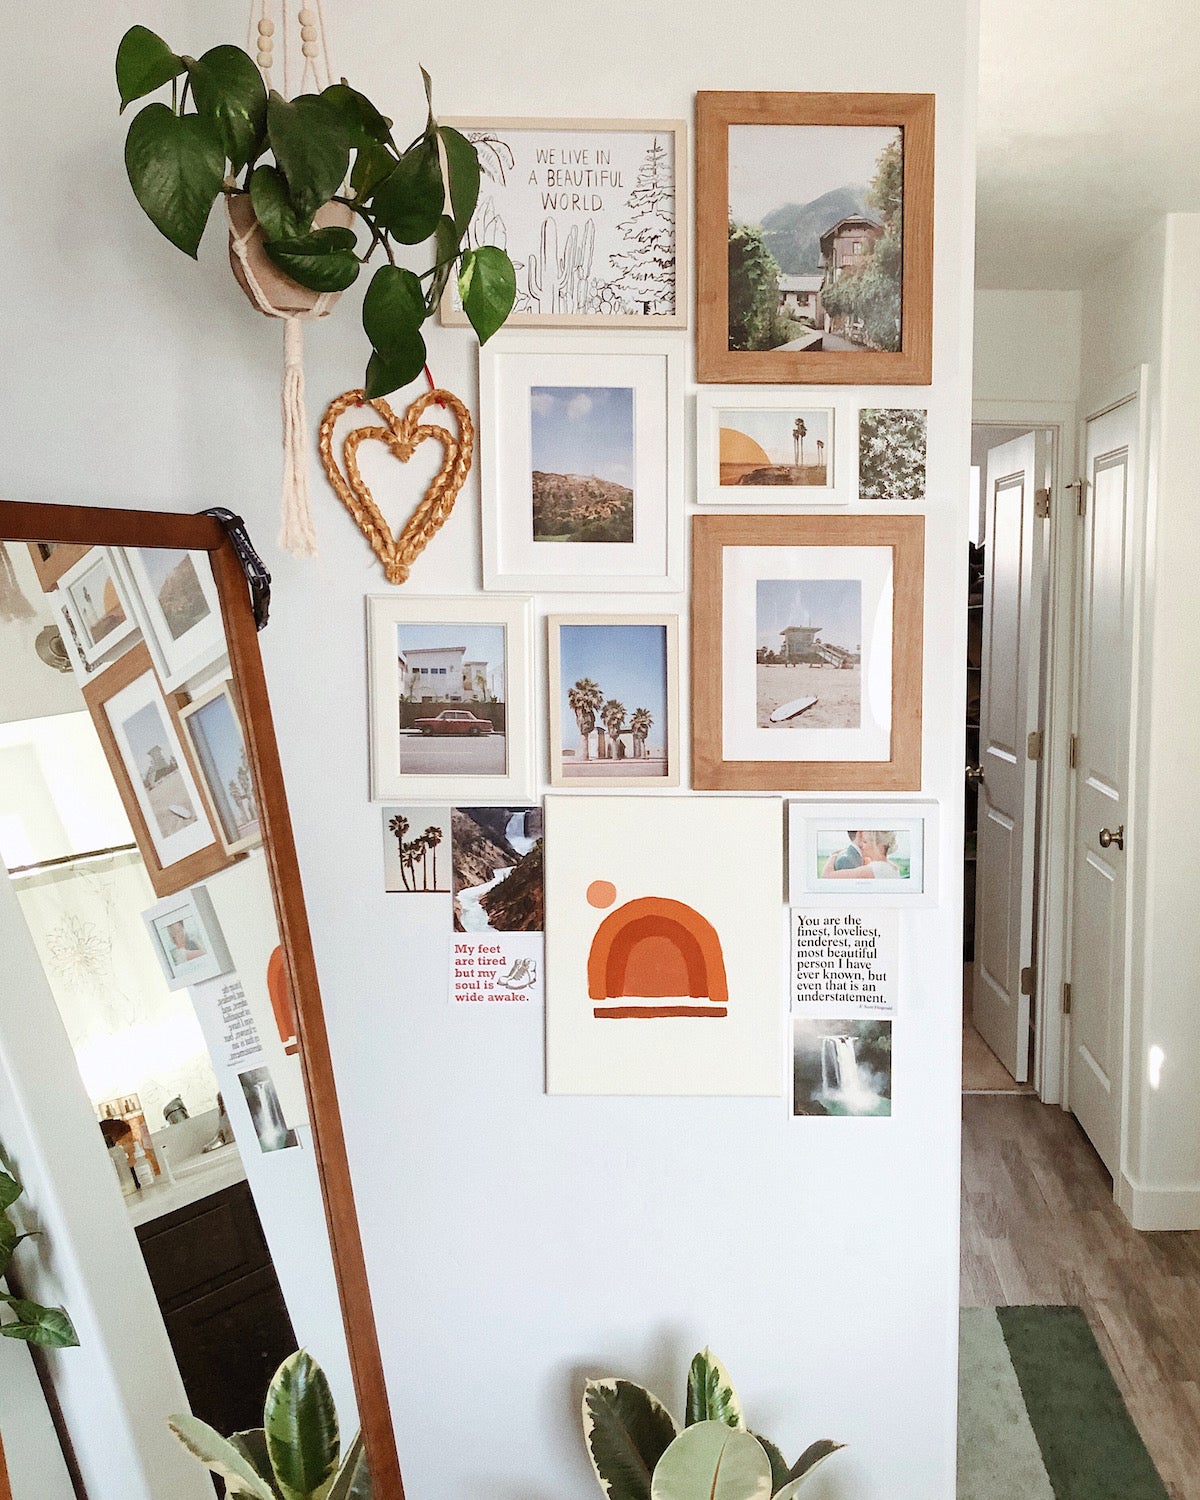 Gallery wall comprised of photos and other art, with or without frames